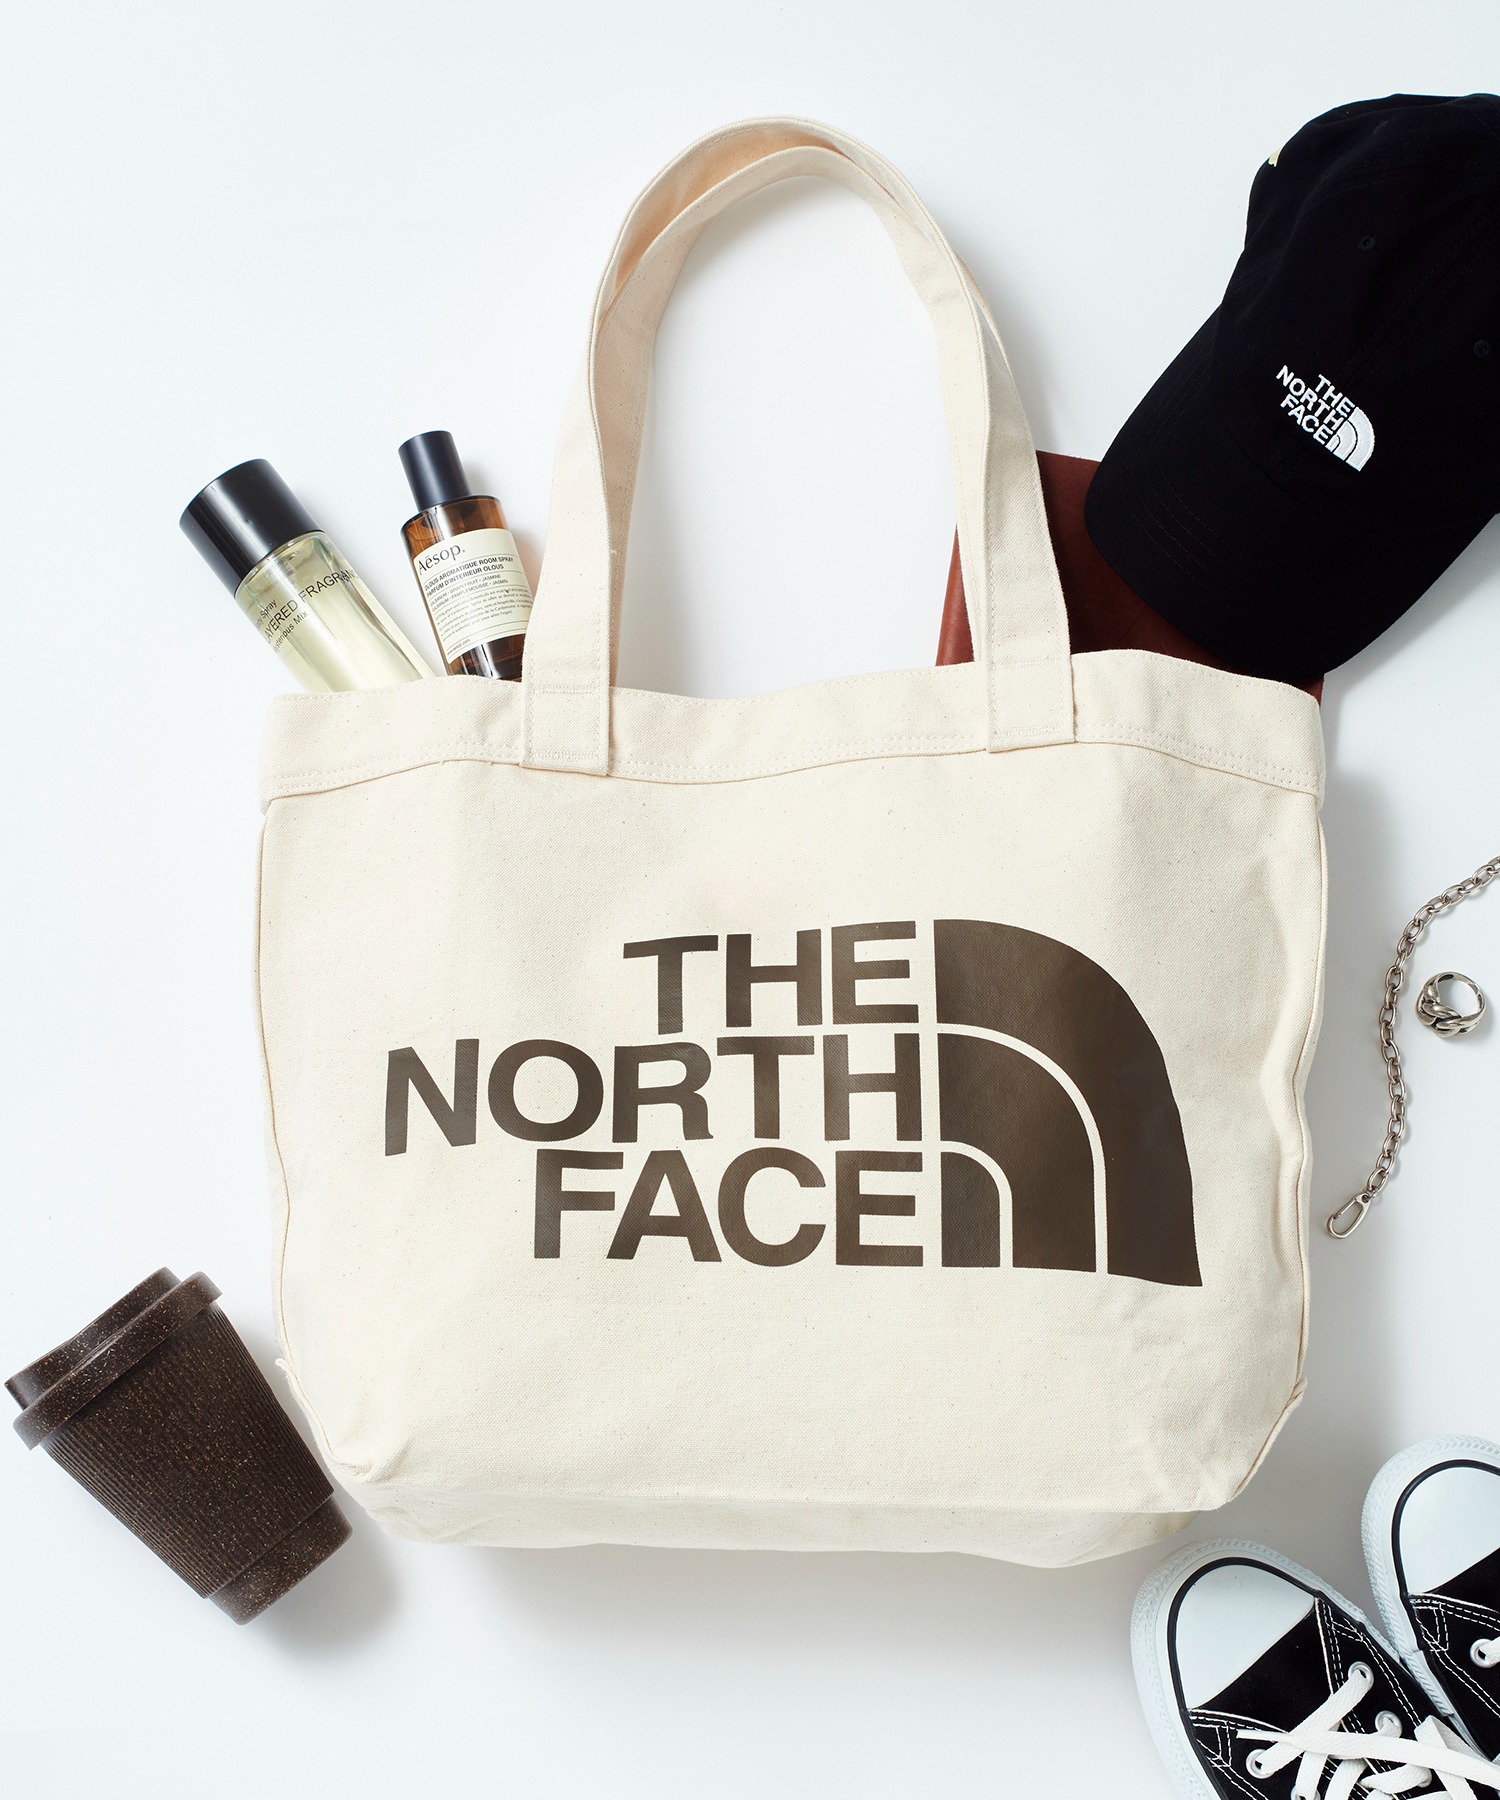 THE NORTH FACE/◎即納◎【THE NORTH FACE/ザ・ノースフェイス】Cotton Tote NF0A3VWQ R17 / コットン ロゴ トートバッグ プレゼント/504859080